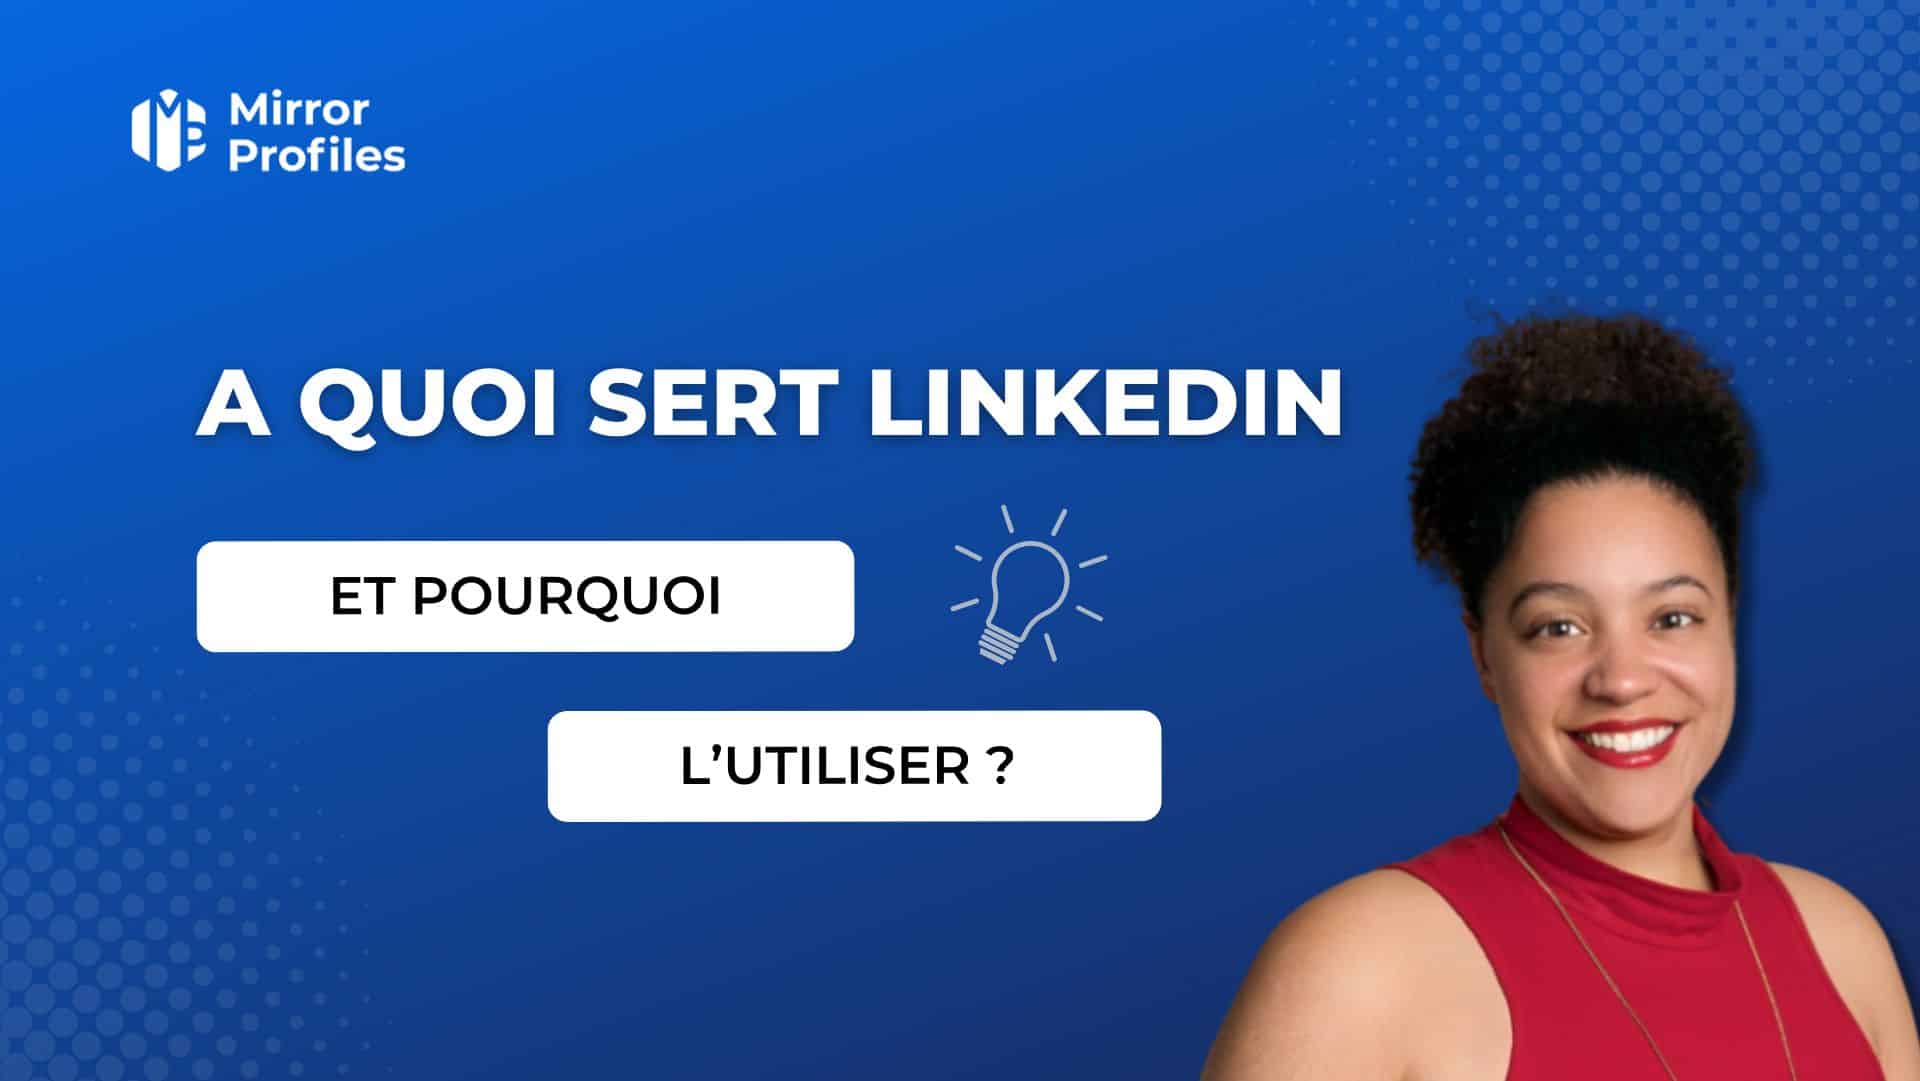 A title graphic showing “A QUOI SERT LINKEDIN” with a lightbulb icon. Below are buttons labeled “ET POURQUOI” on the left and “L'UTILISER?” on the right, emphasizing what LinkedIn is for and why use it. A person is smiling on the right side of the image.